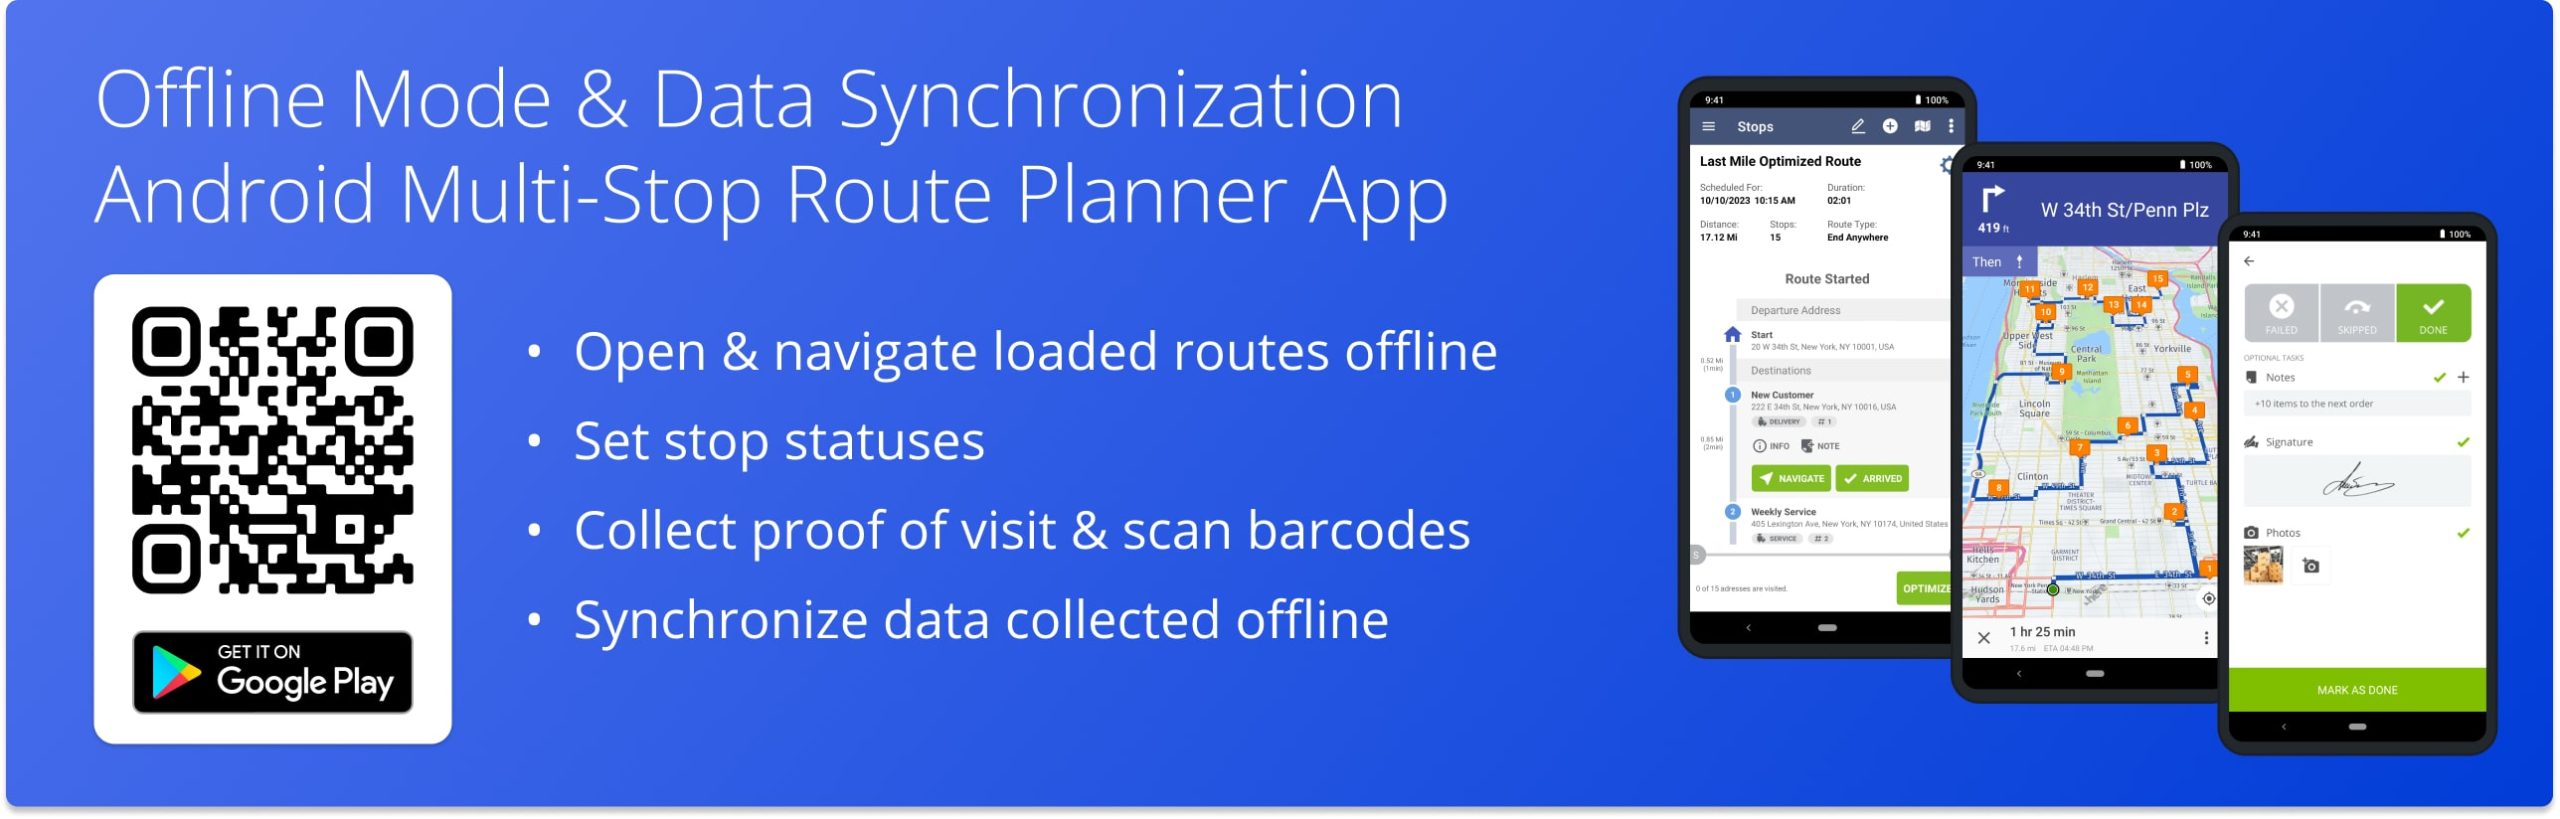 Offline mode allows using Route4Me's Mobile Android Multi-Stop Route Planner app with no internet connection.